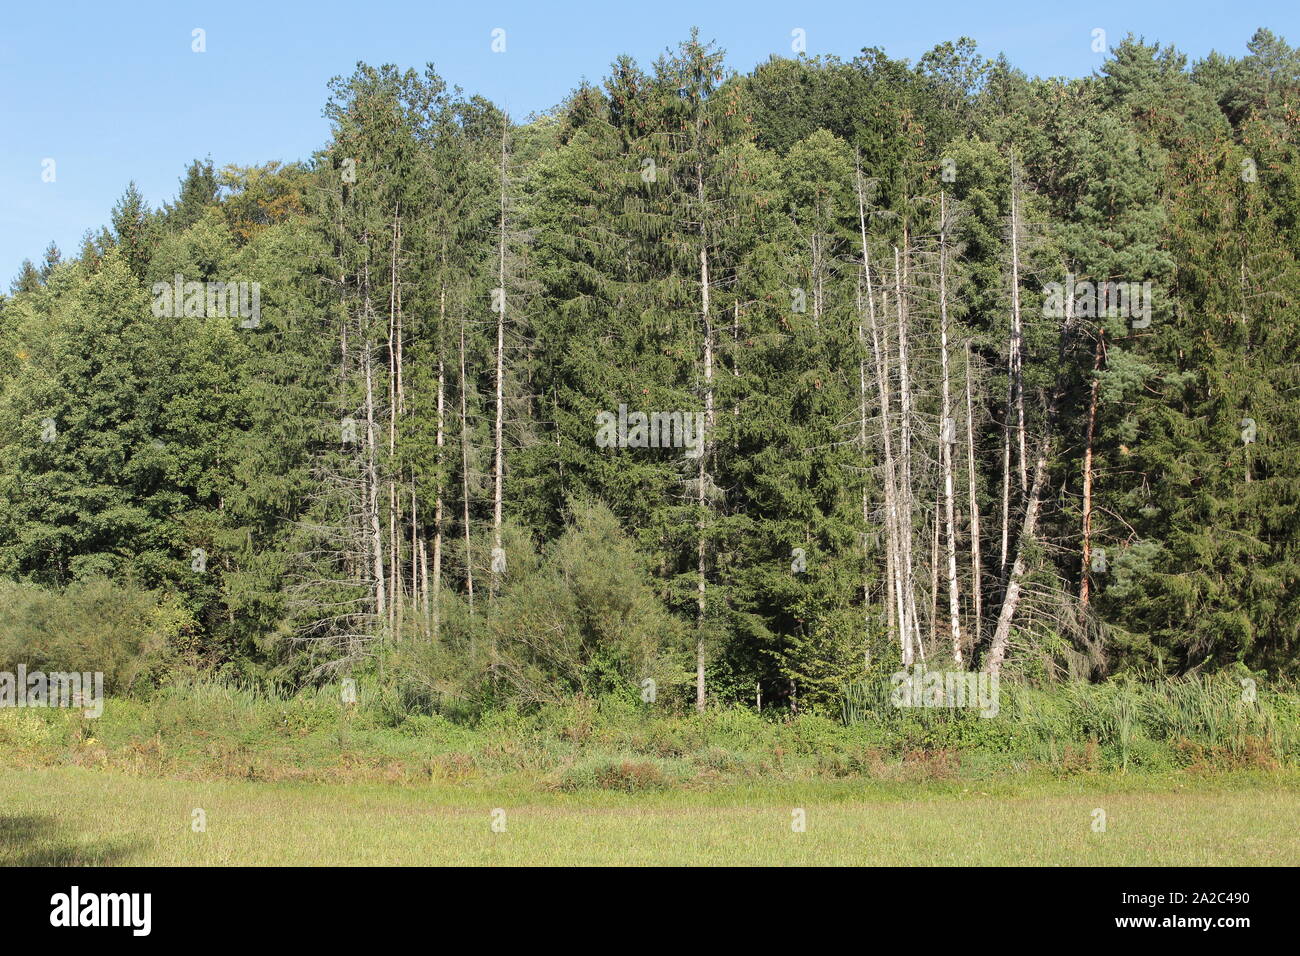 Groups of dead trees in the forest, signs of forest dieback Stock Photo